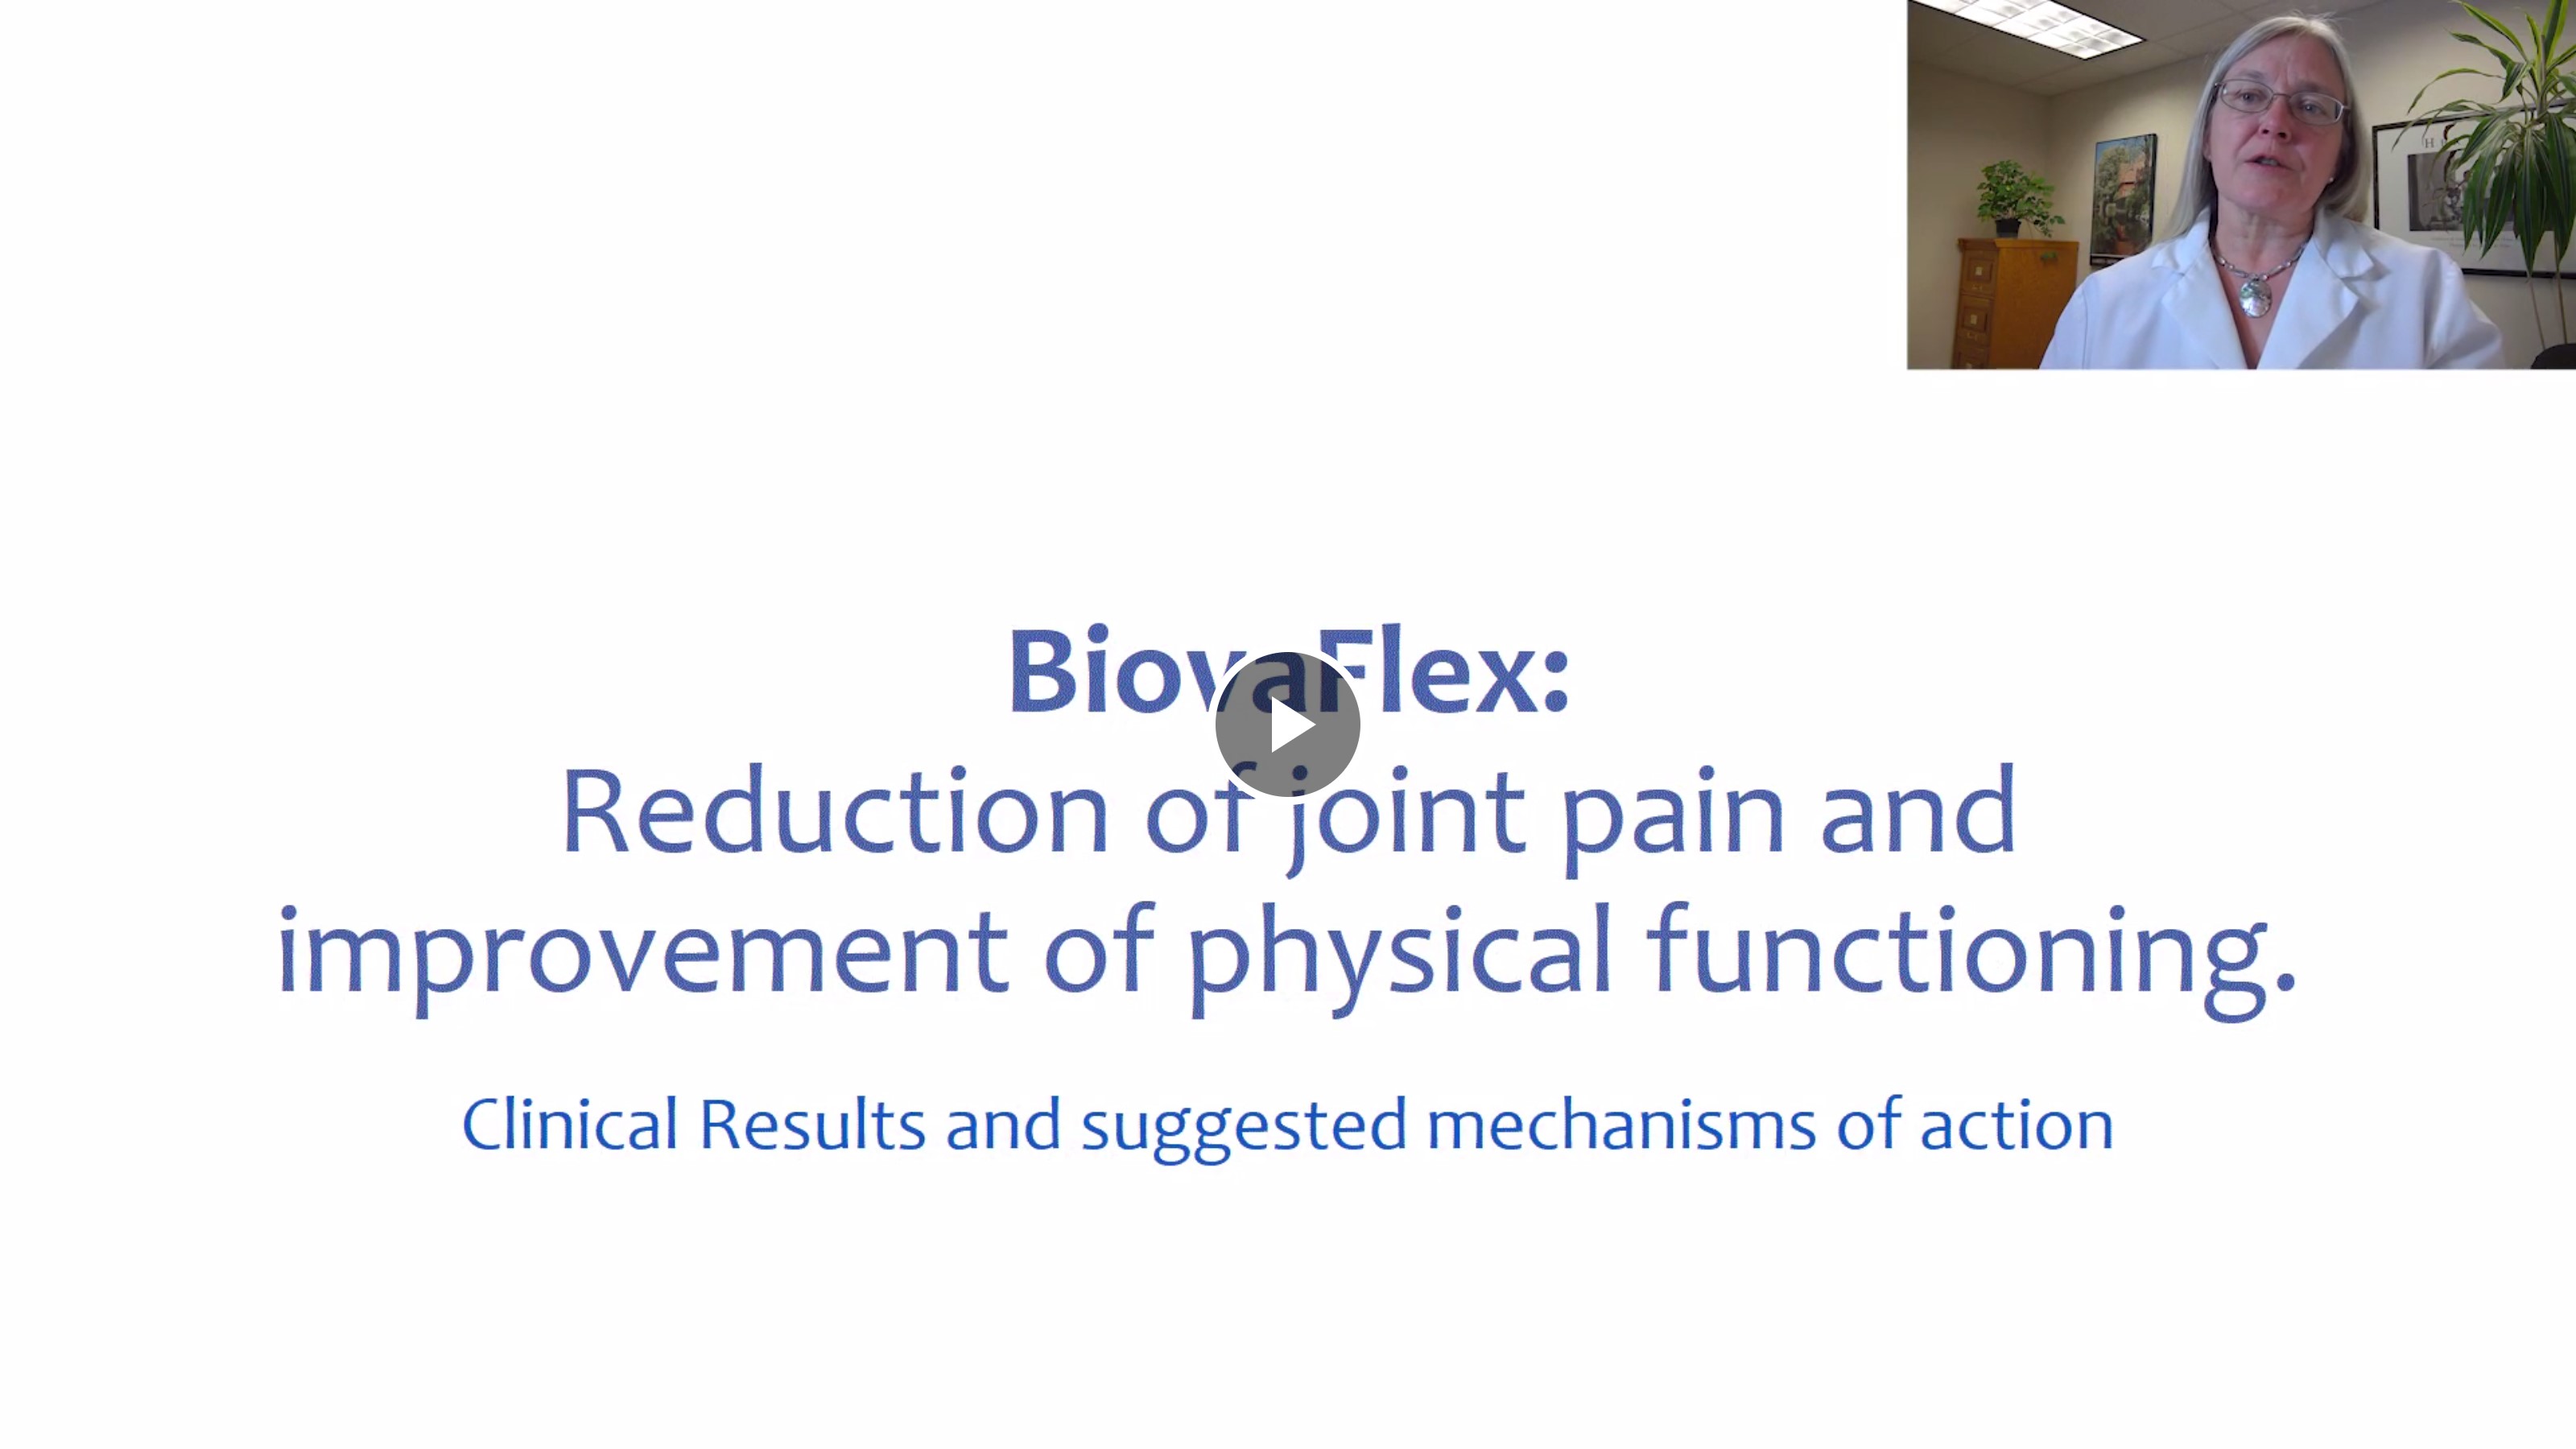 View a video summary of the BiovaFlex study: